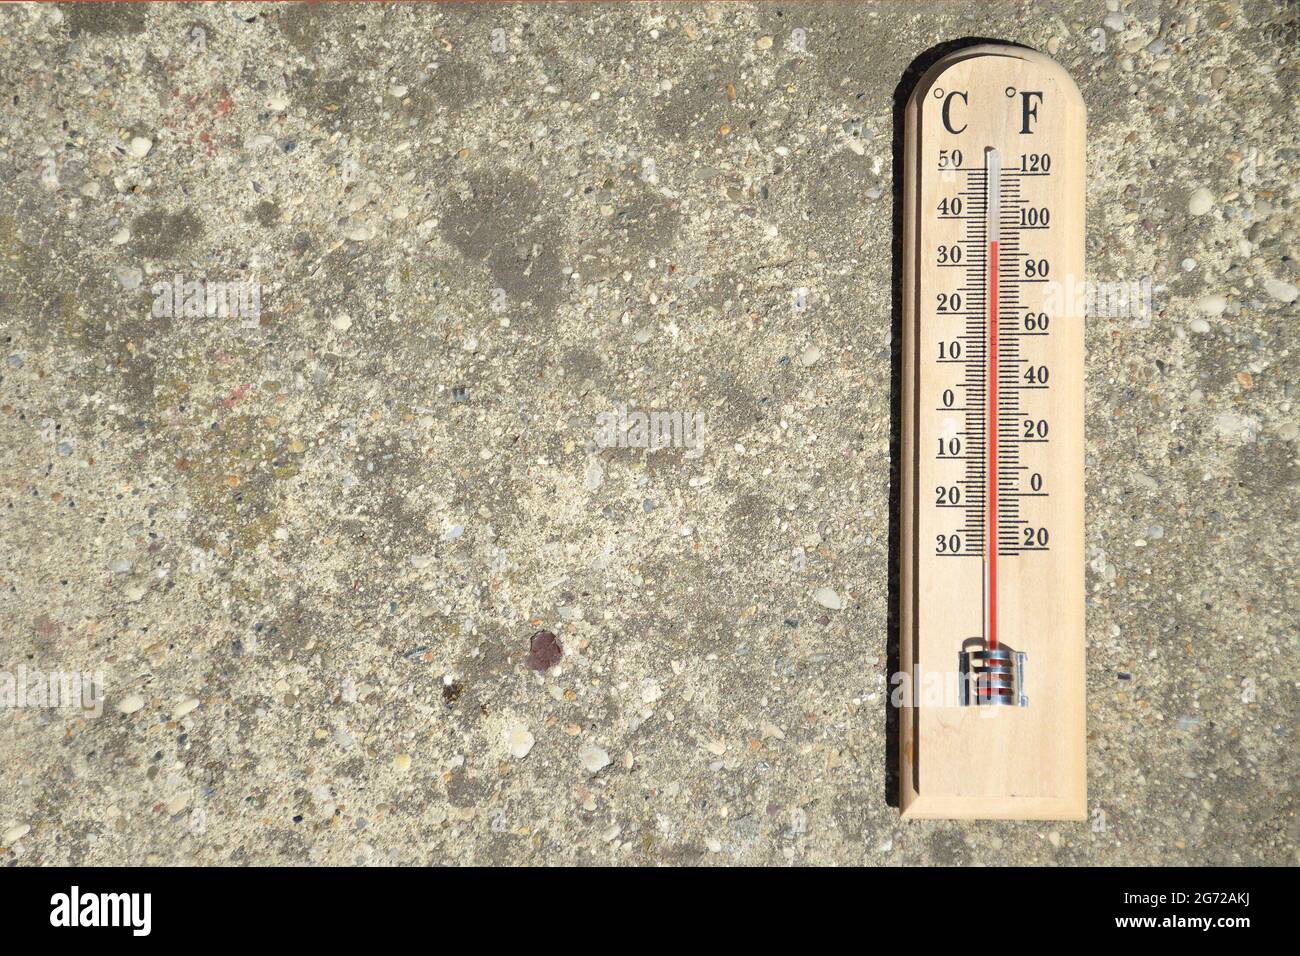 Thermometer on concrete background showing high summer temperature Stock Photo